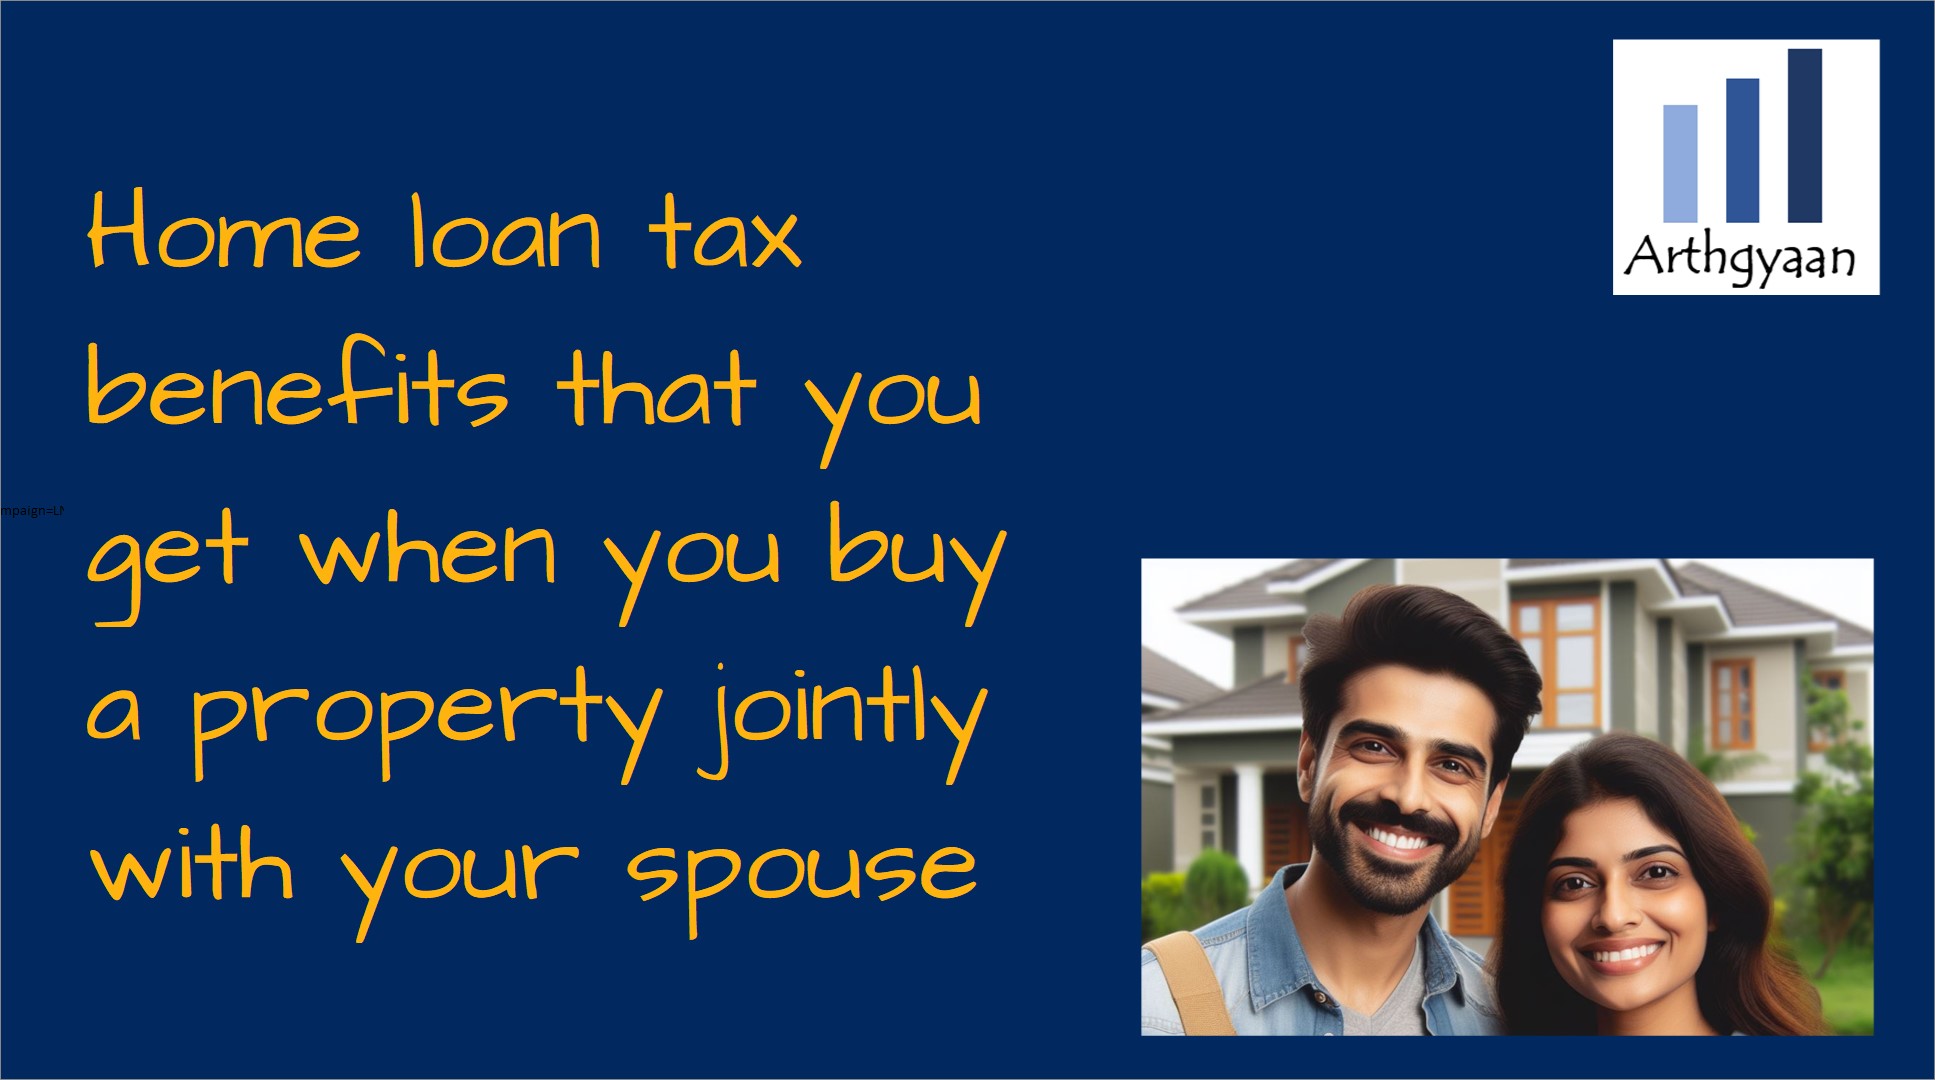 Home loan tax benefits that you get when you buy a property jointly with your spouse